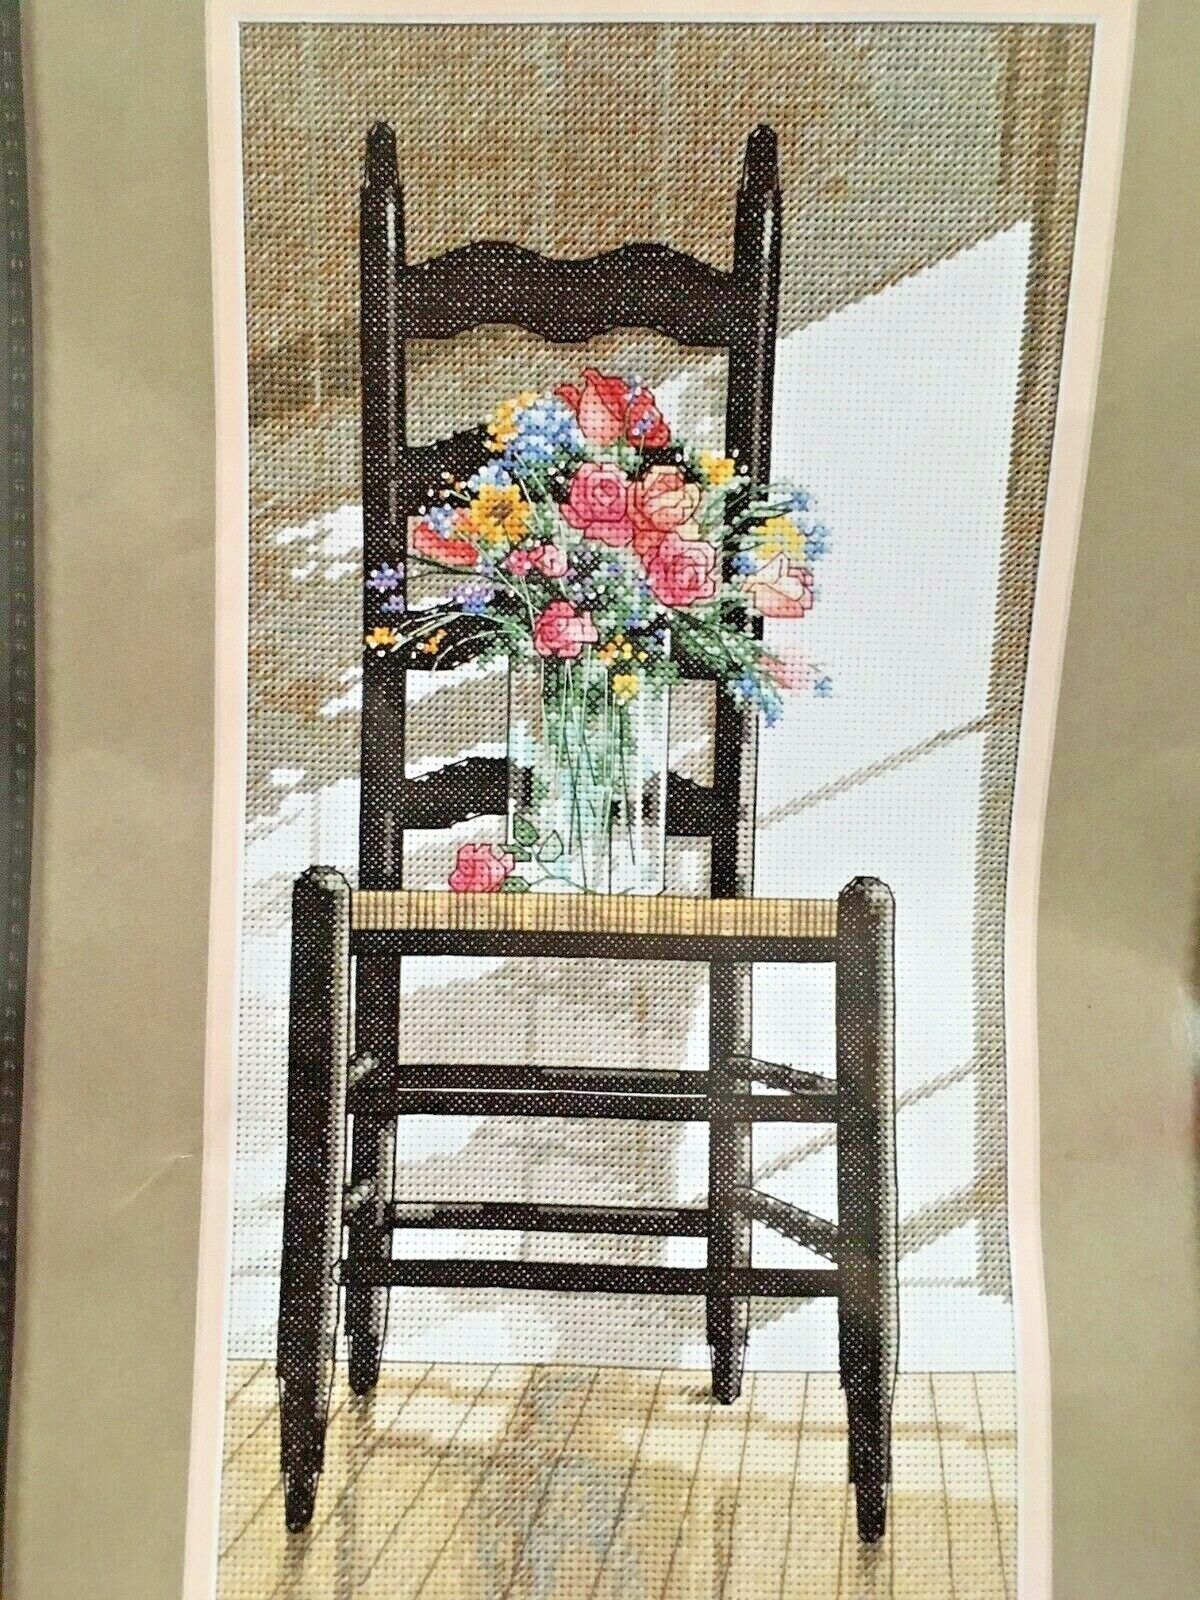 Dimensions 35146 CHAIR WITH FLOWERS Counted Cross Stitch Kit HTF opened -unused